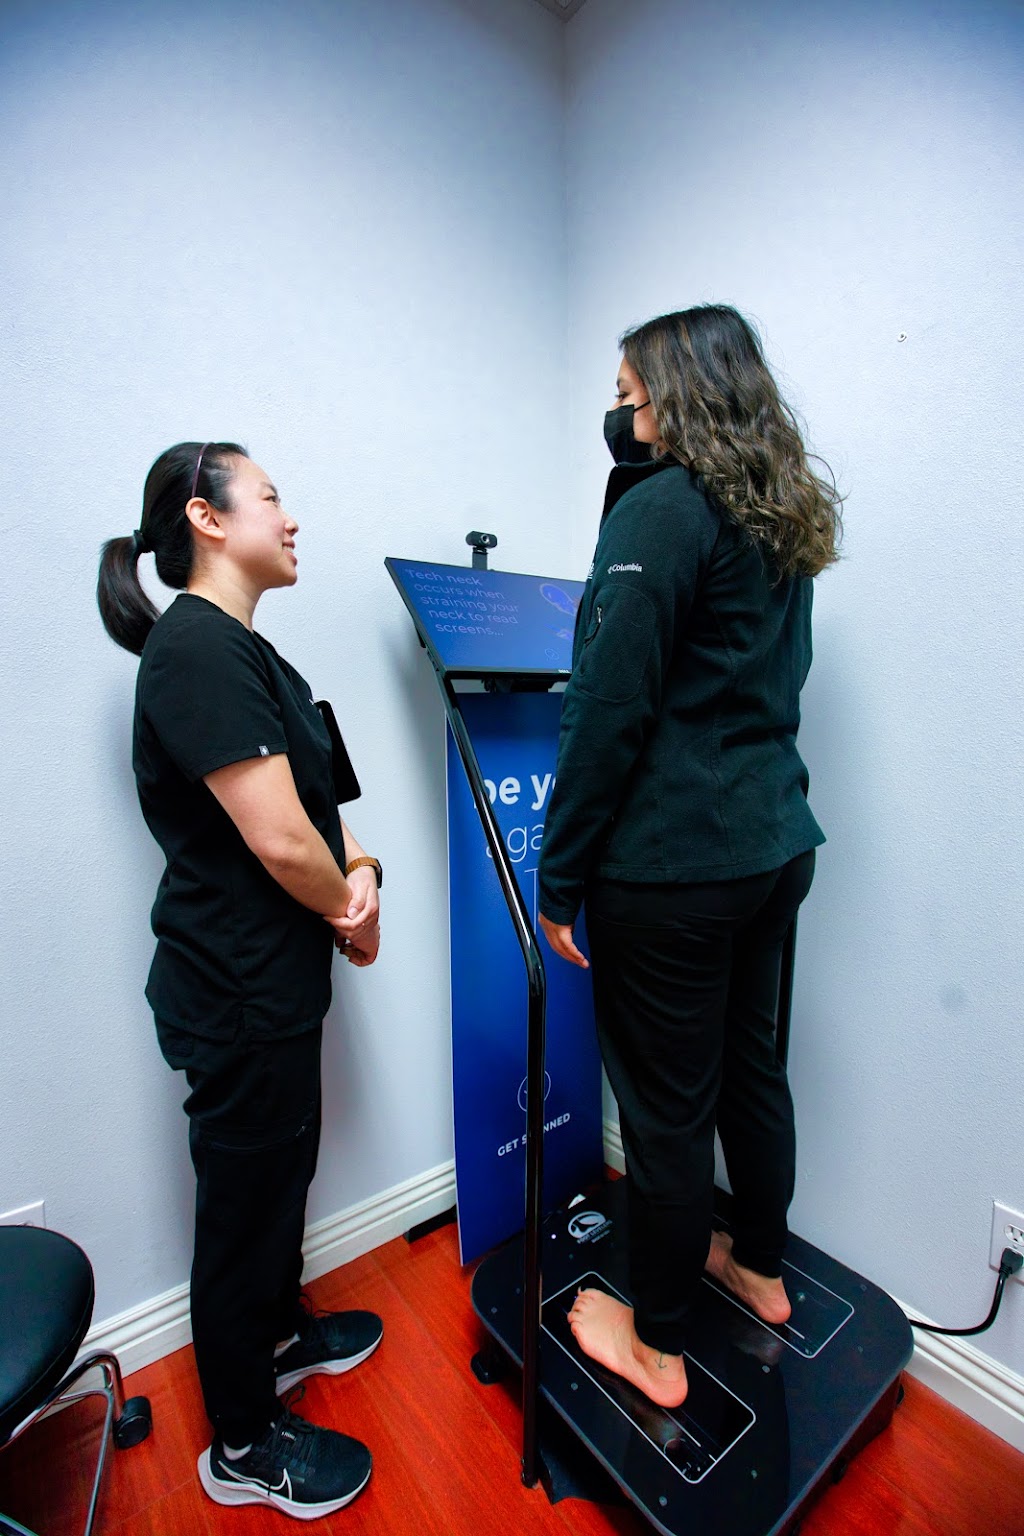 Summit Health Center | 18575 Gale Ave Ste 265, City of Industry, CA 91748 | Phone: (626) 623-8684